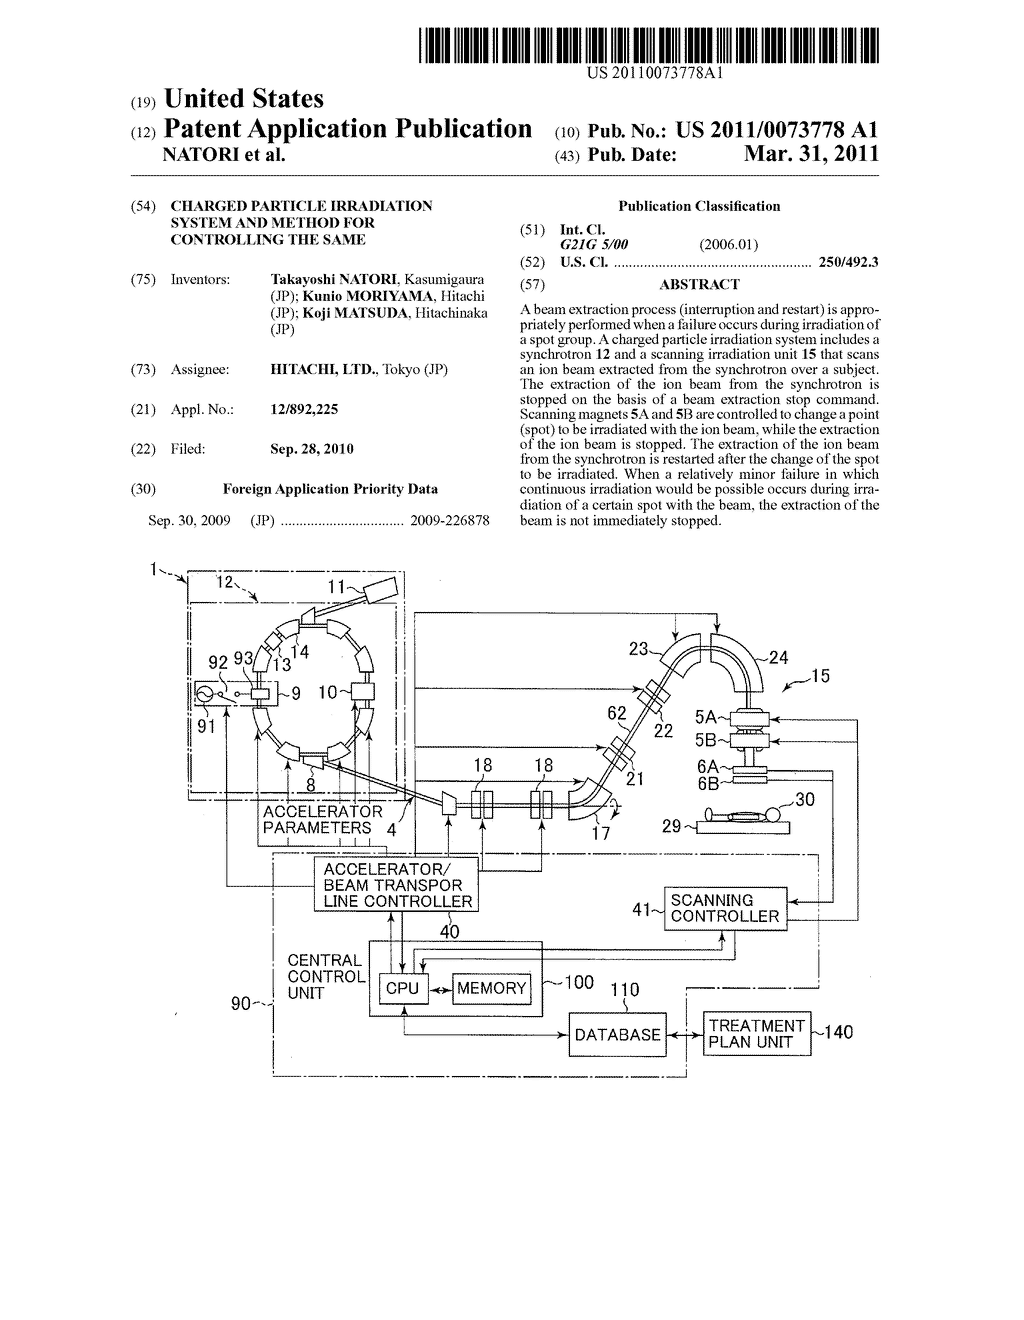 CHARGED PARTICLE IRRADIATION SYSTEM AND METHOD FOR CONTROLLING THE SAME - diagram, schematic, and image 01